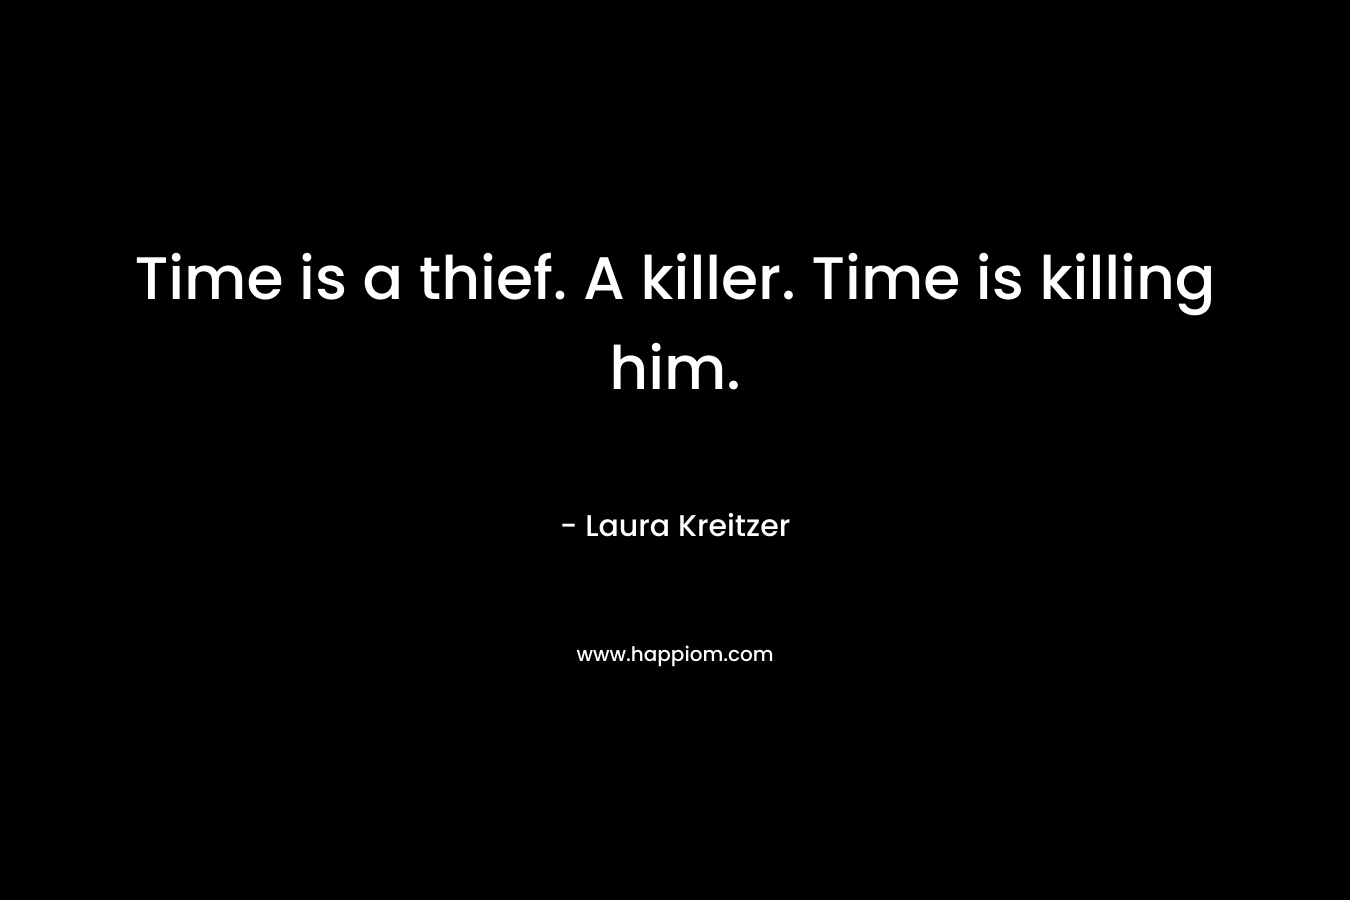 Time is a thief. A killer. Time is killing him.